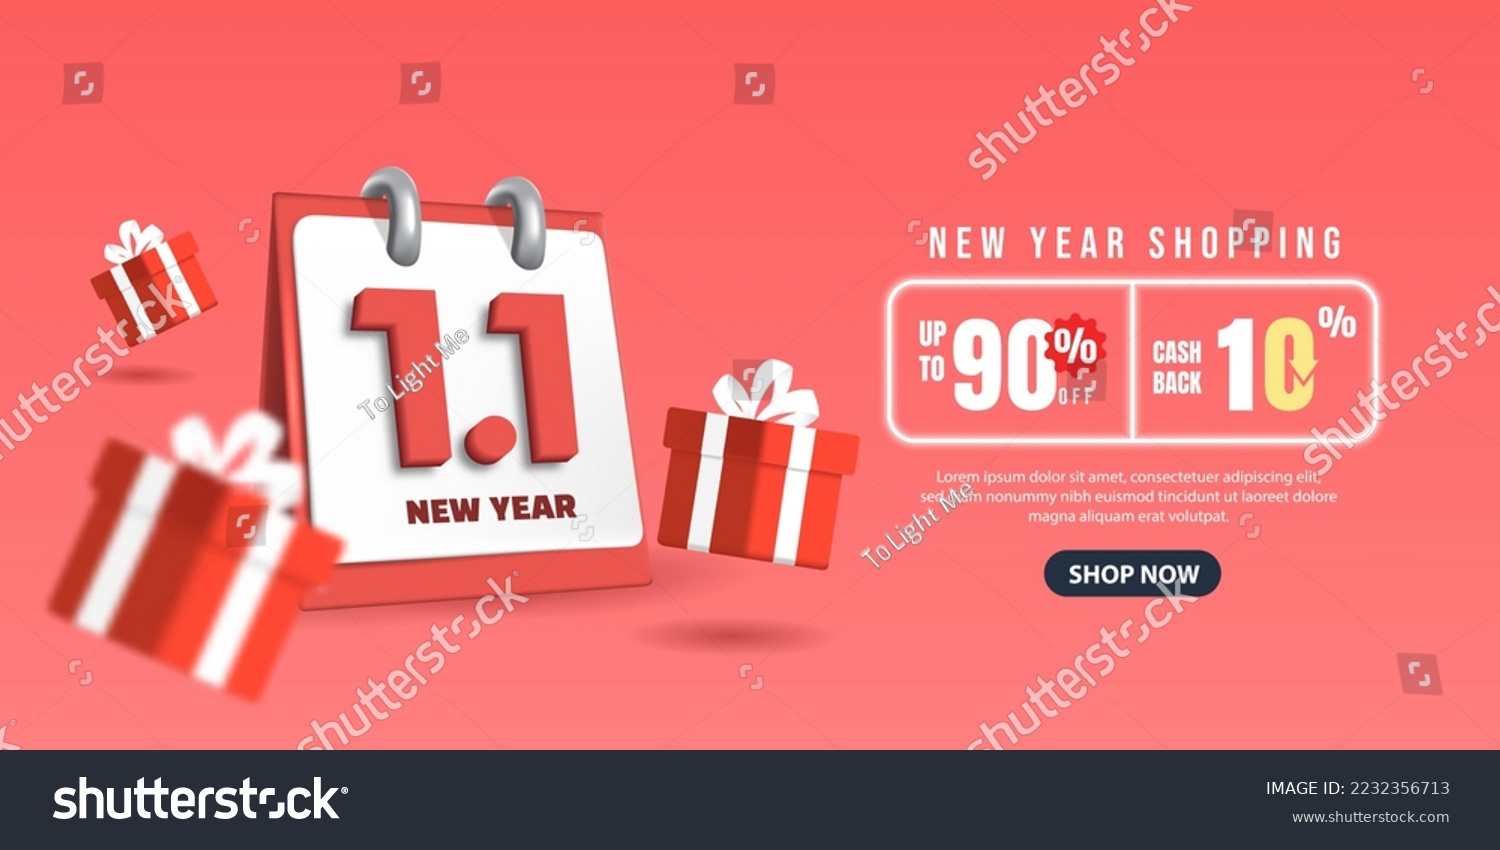 SVG of 1.1 New Year Sale with 3D Calendar. January sales banner template design for social media and website. svg